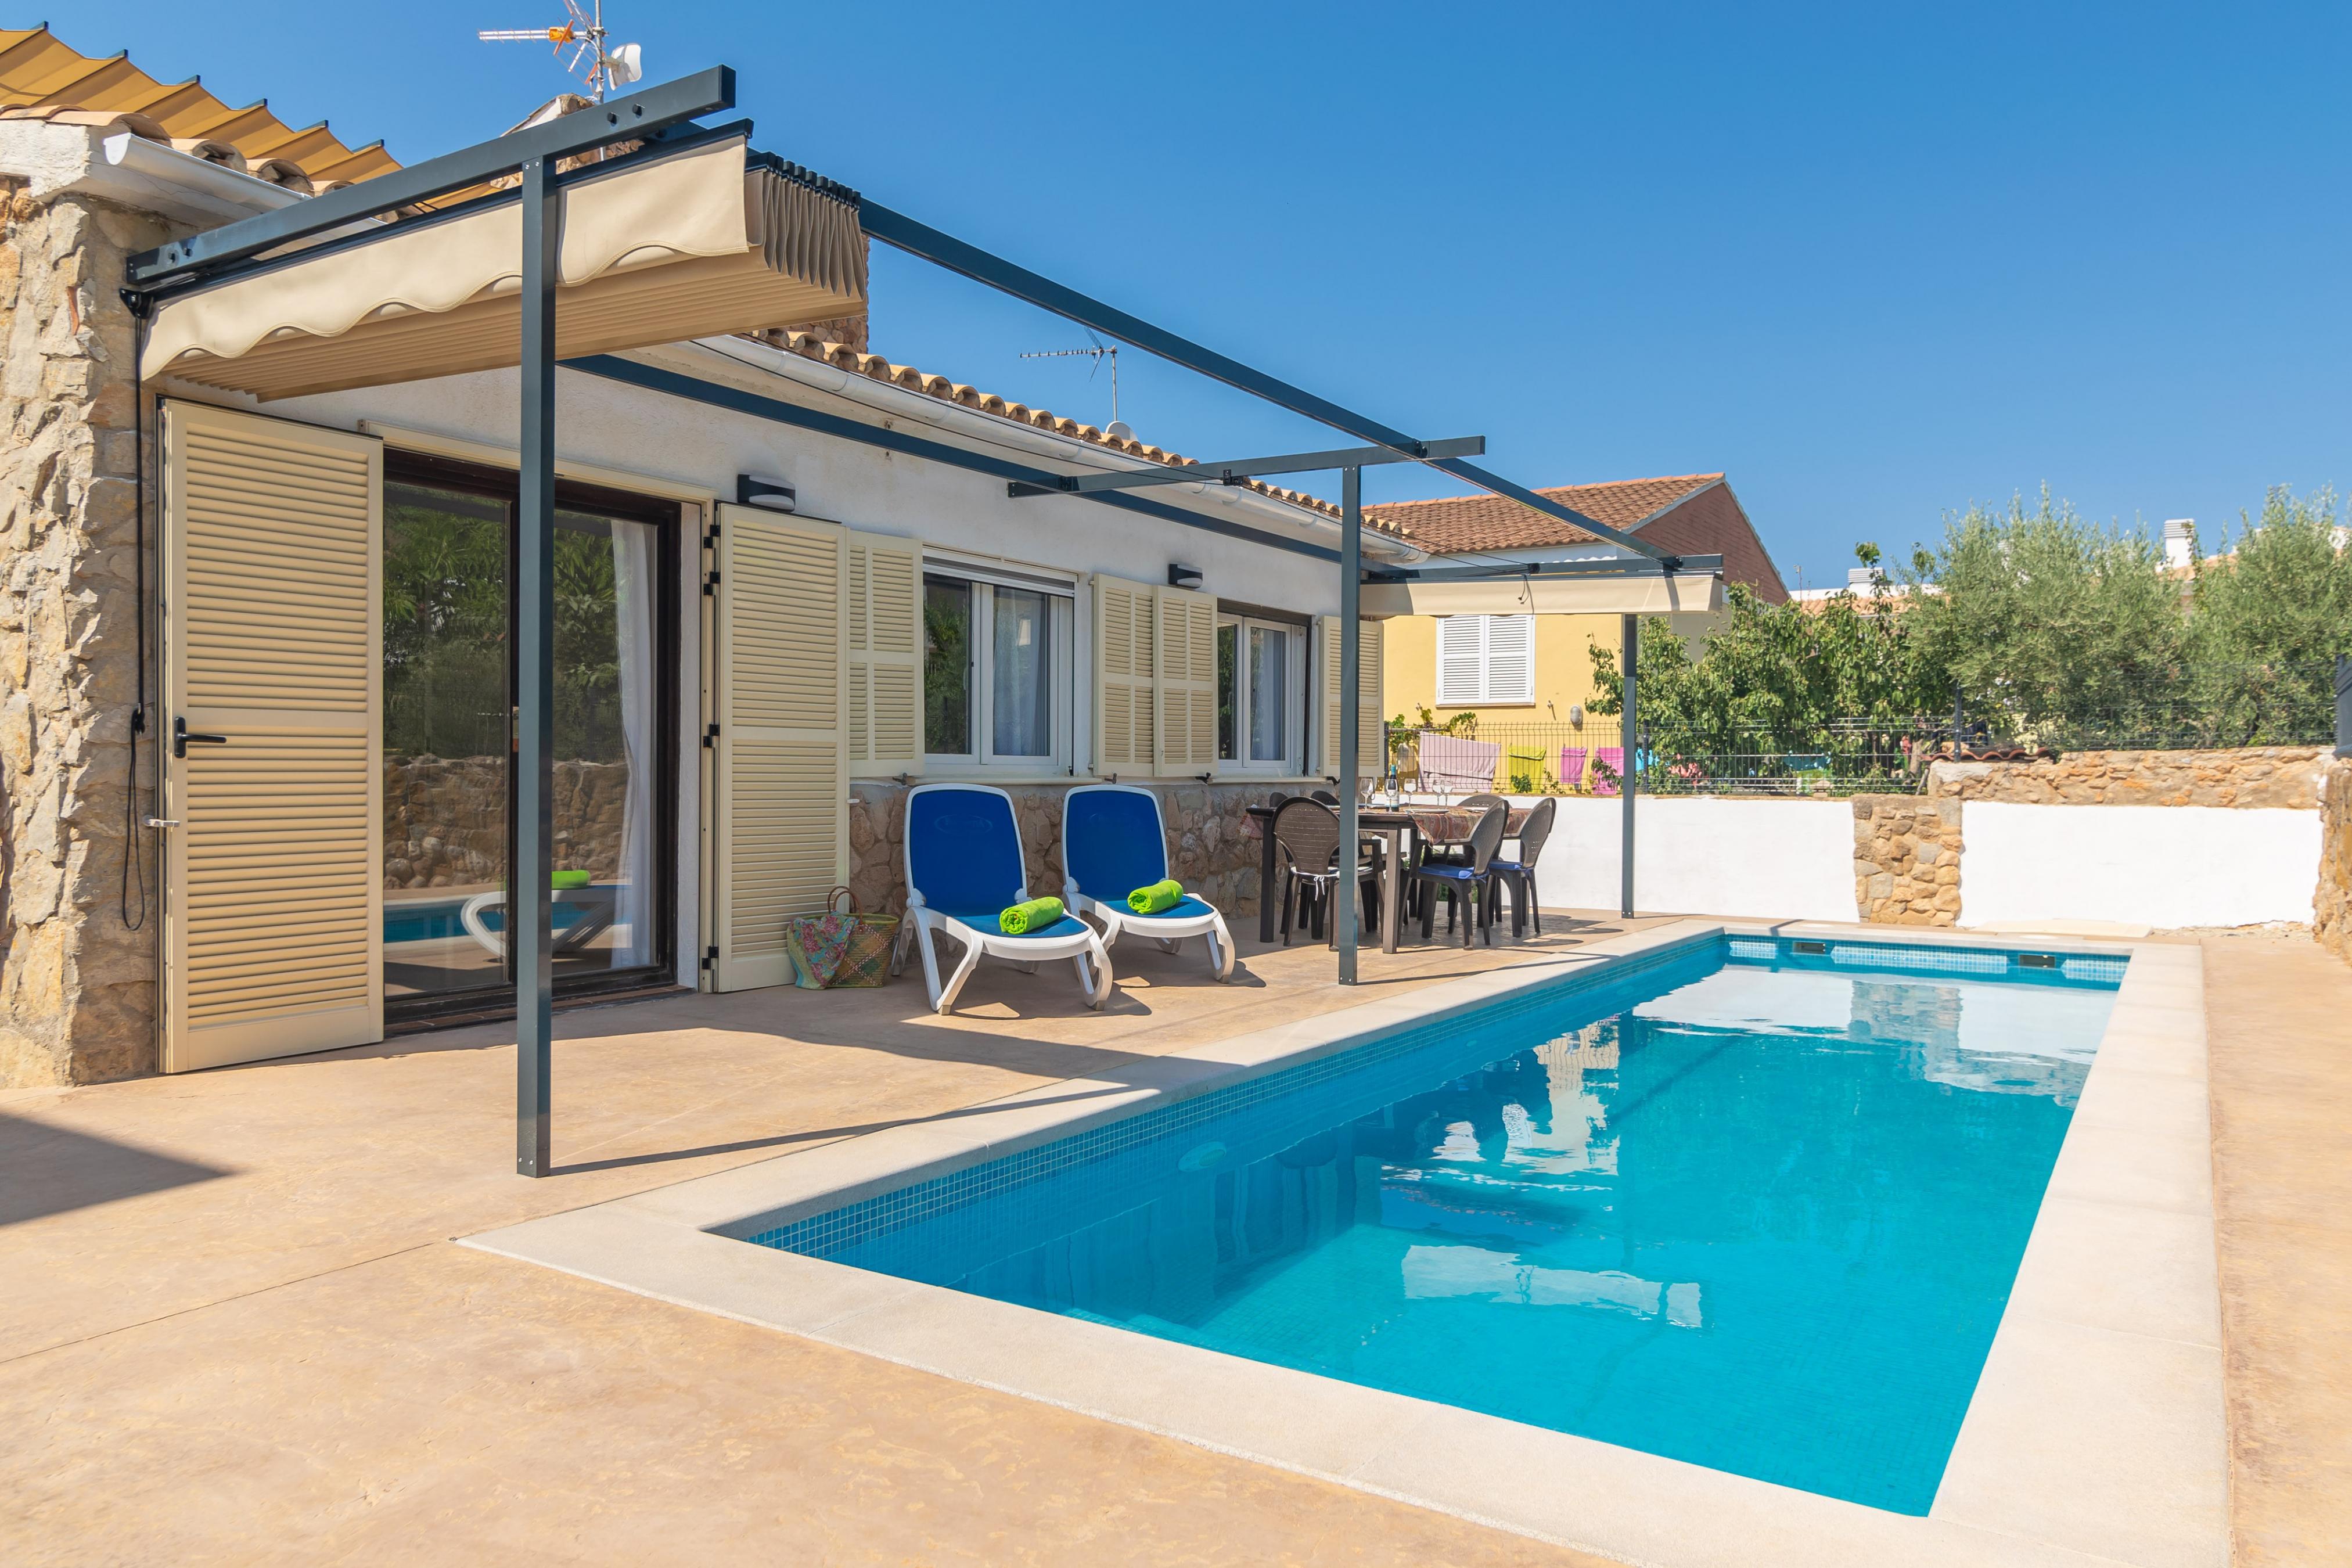 Property Image 1 - CAN CLAVELL - Nice holiday home with private pool near the beach. Free WIFI